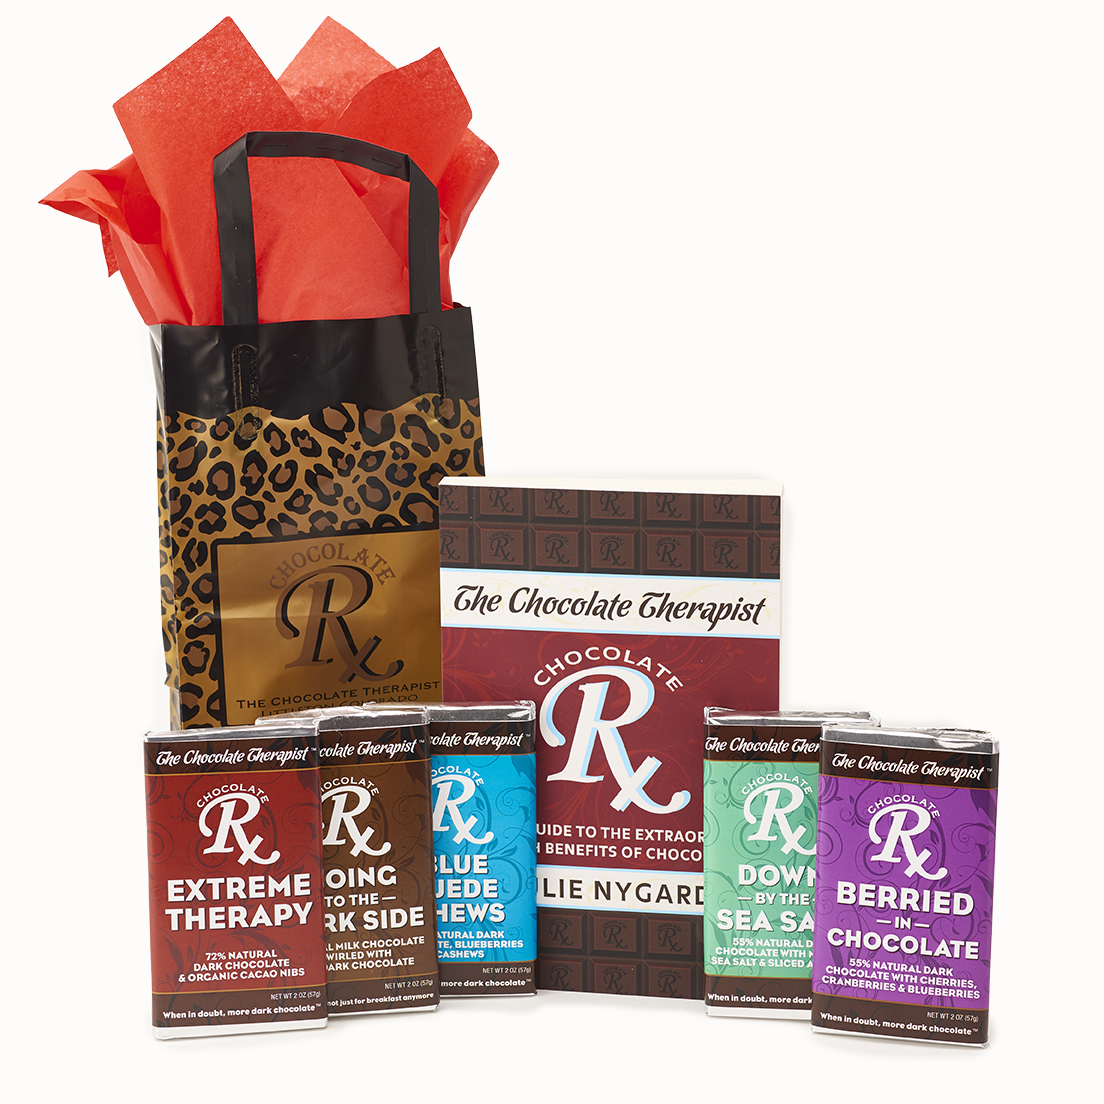 http://www.thechocolatetherapist.com/wp-content/uploads/2020/02/Gift-bag-1a.jpg